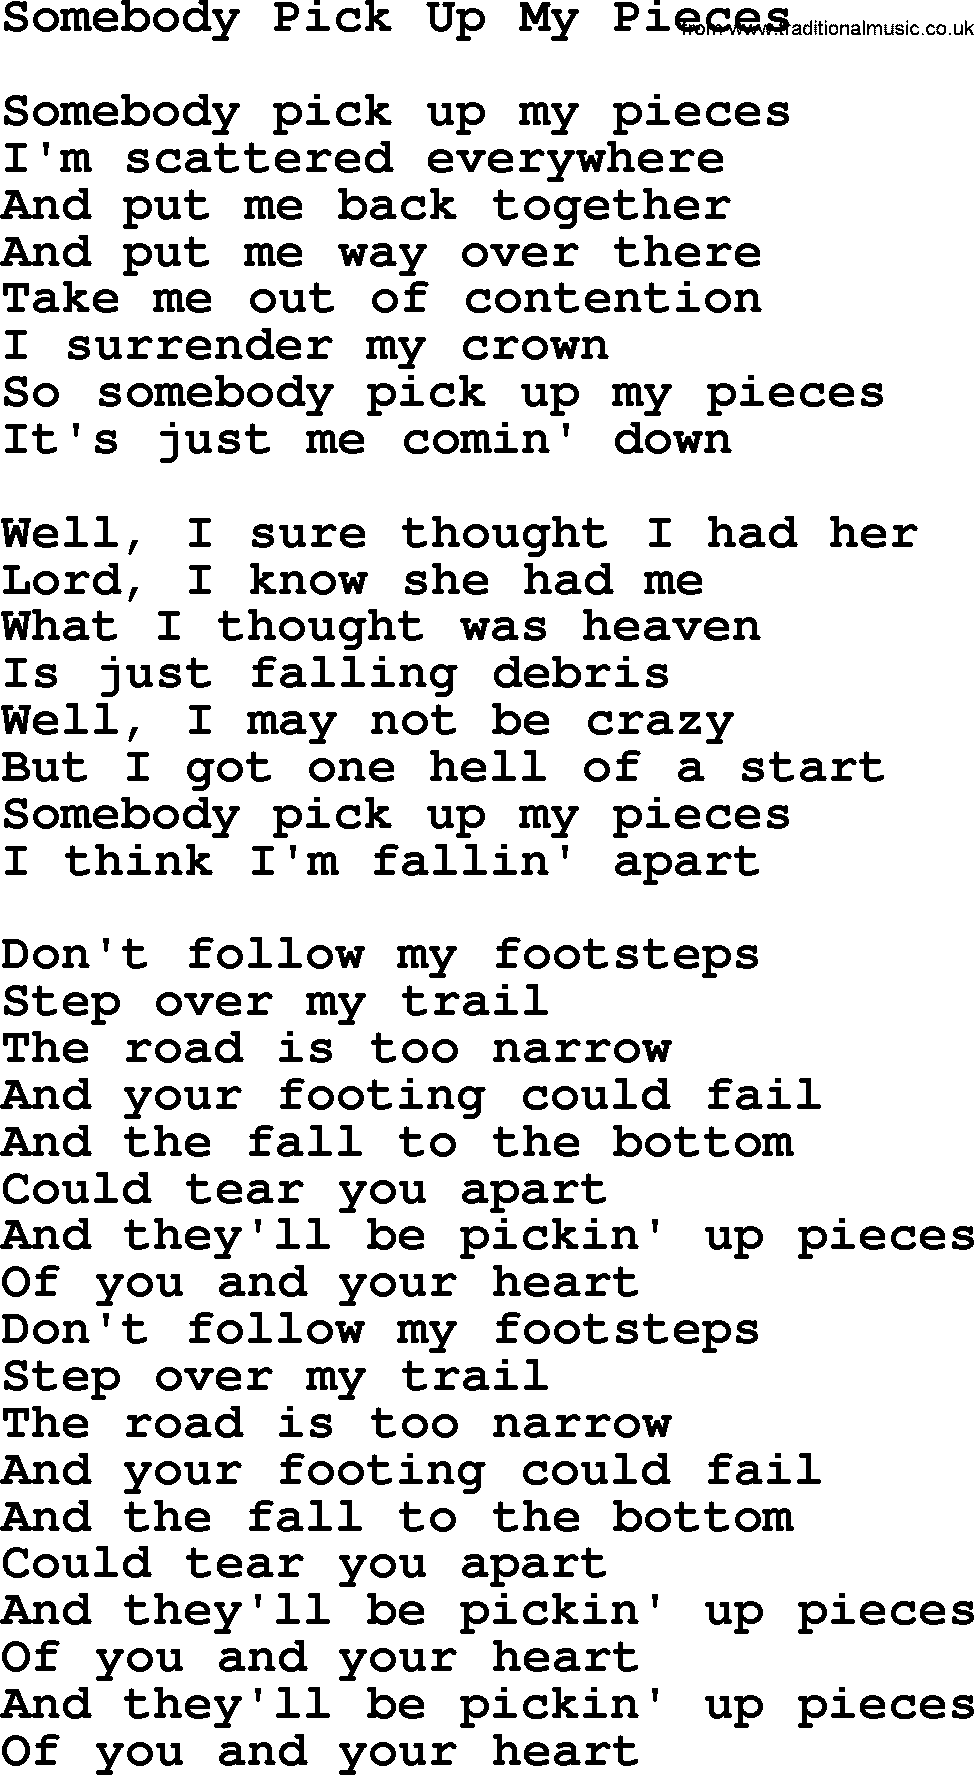 Willie Nelson song: Somebody Pick Up My Pieces lyrics